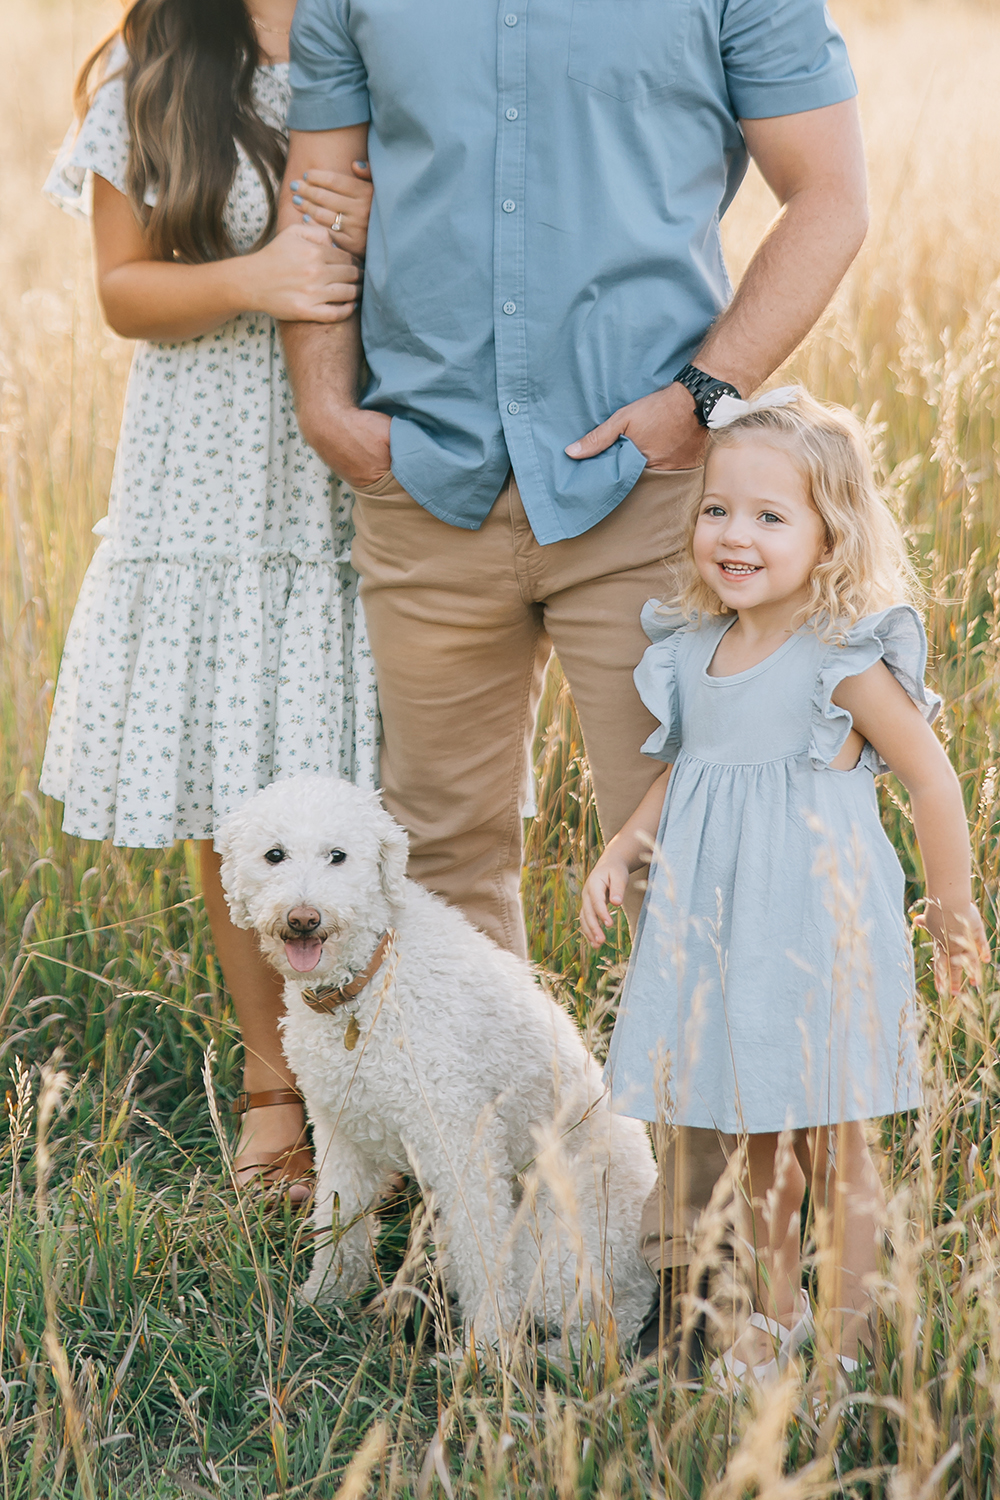 A toddler girl in a spring dress is excited about family pictures in a grass field of Tennessee with natural lighting to complement the outfit color scheme. Family outfit inspo family pet kids outdoor location comfortable clothing personal style #outdoorfamilyphotography #Tennessefamilyphotographer #mississippifamilyphotographer #tipsforsummerfamilyphotos

